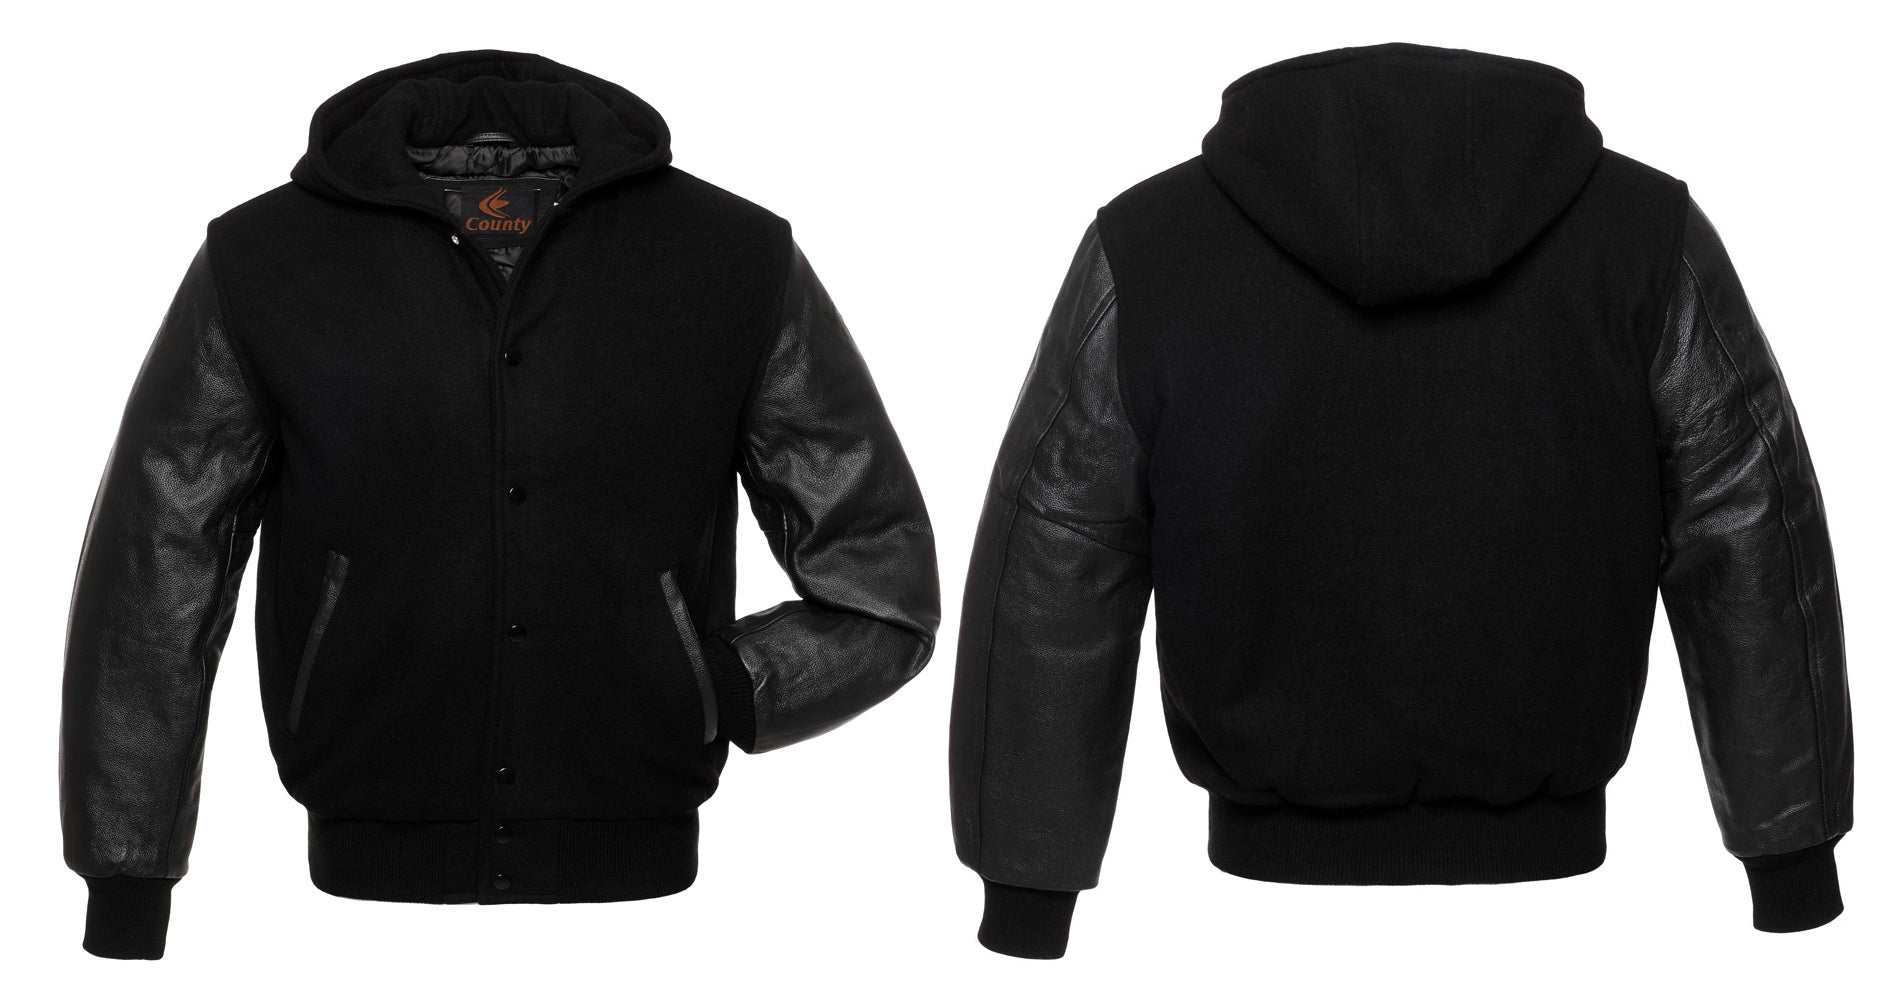 Bomber Varsity Jacket: Black body, black leather sleeves. Perfect blend of sporty and edgy style.